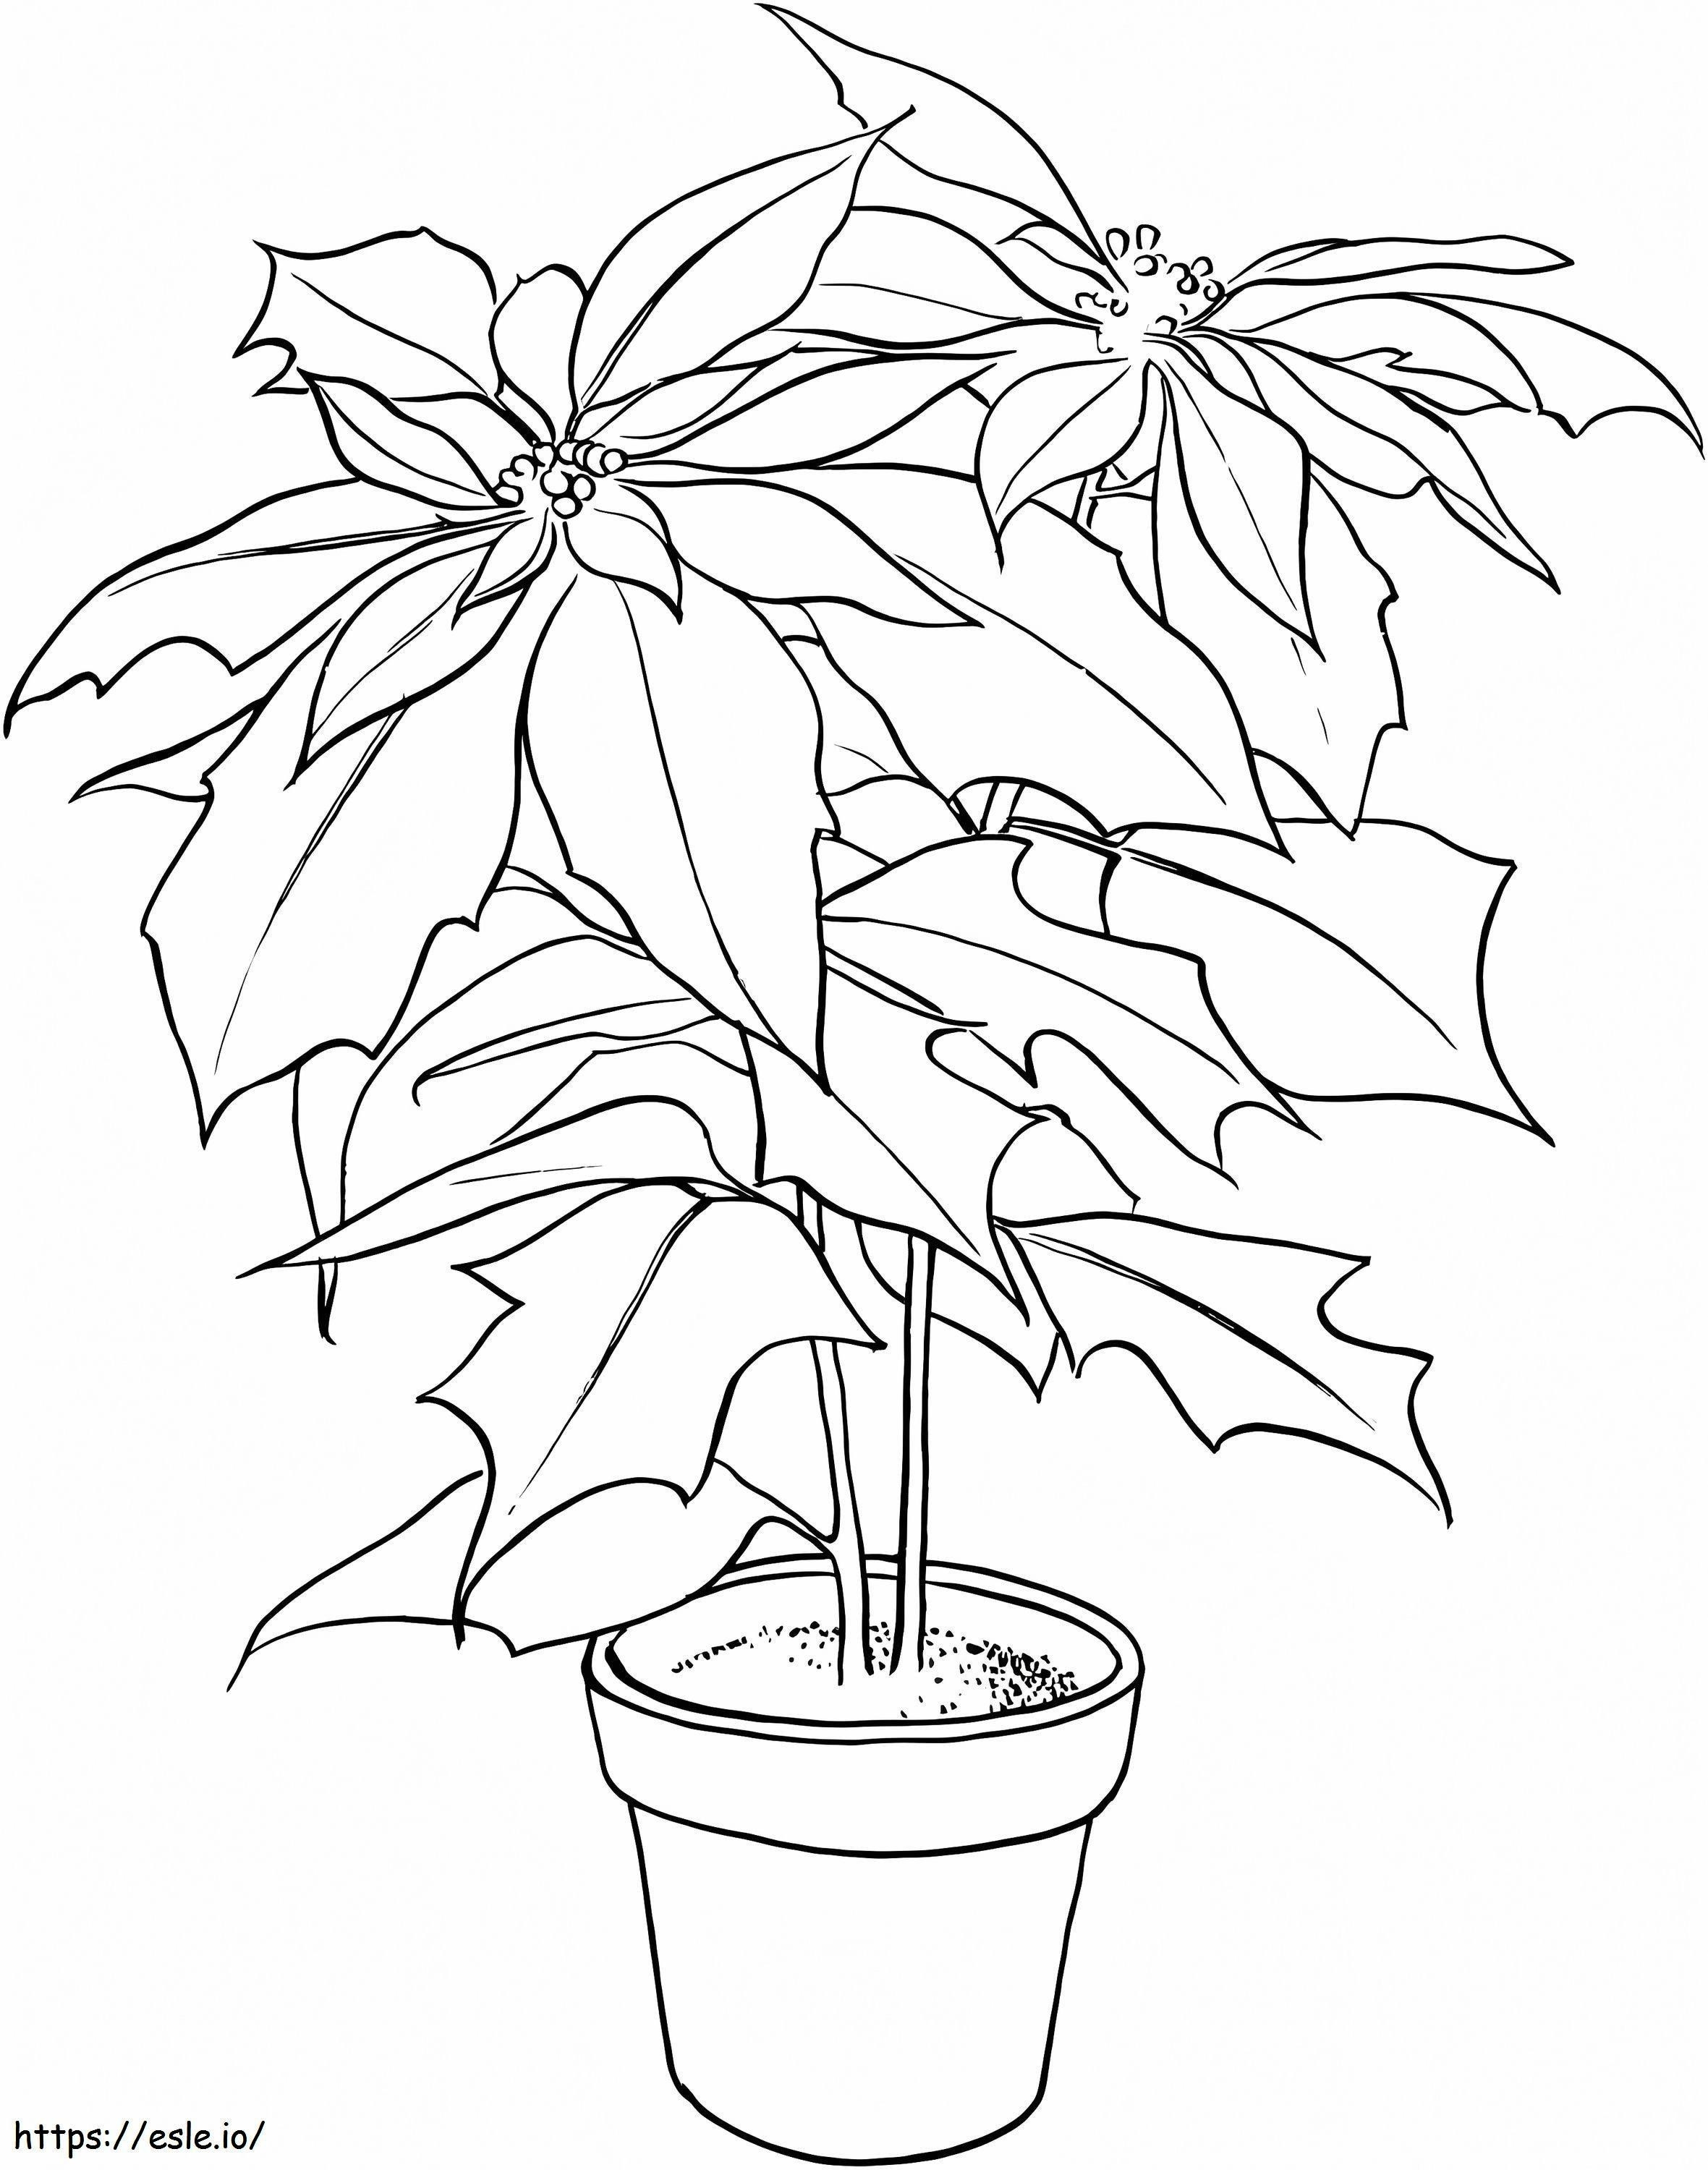 Poinsettia Christmas Flower coloring page